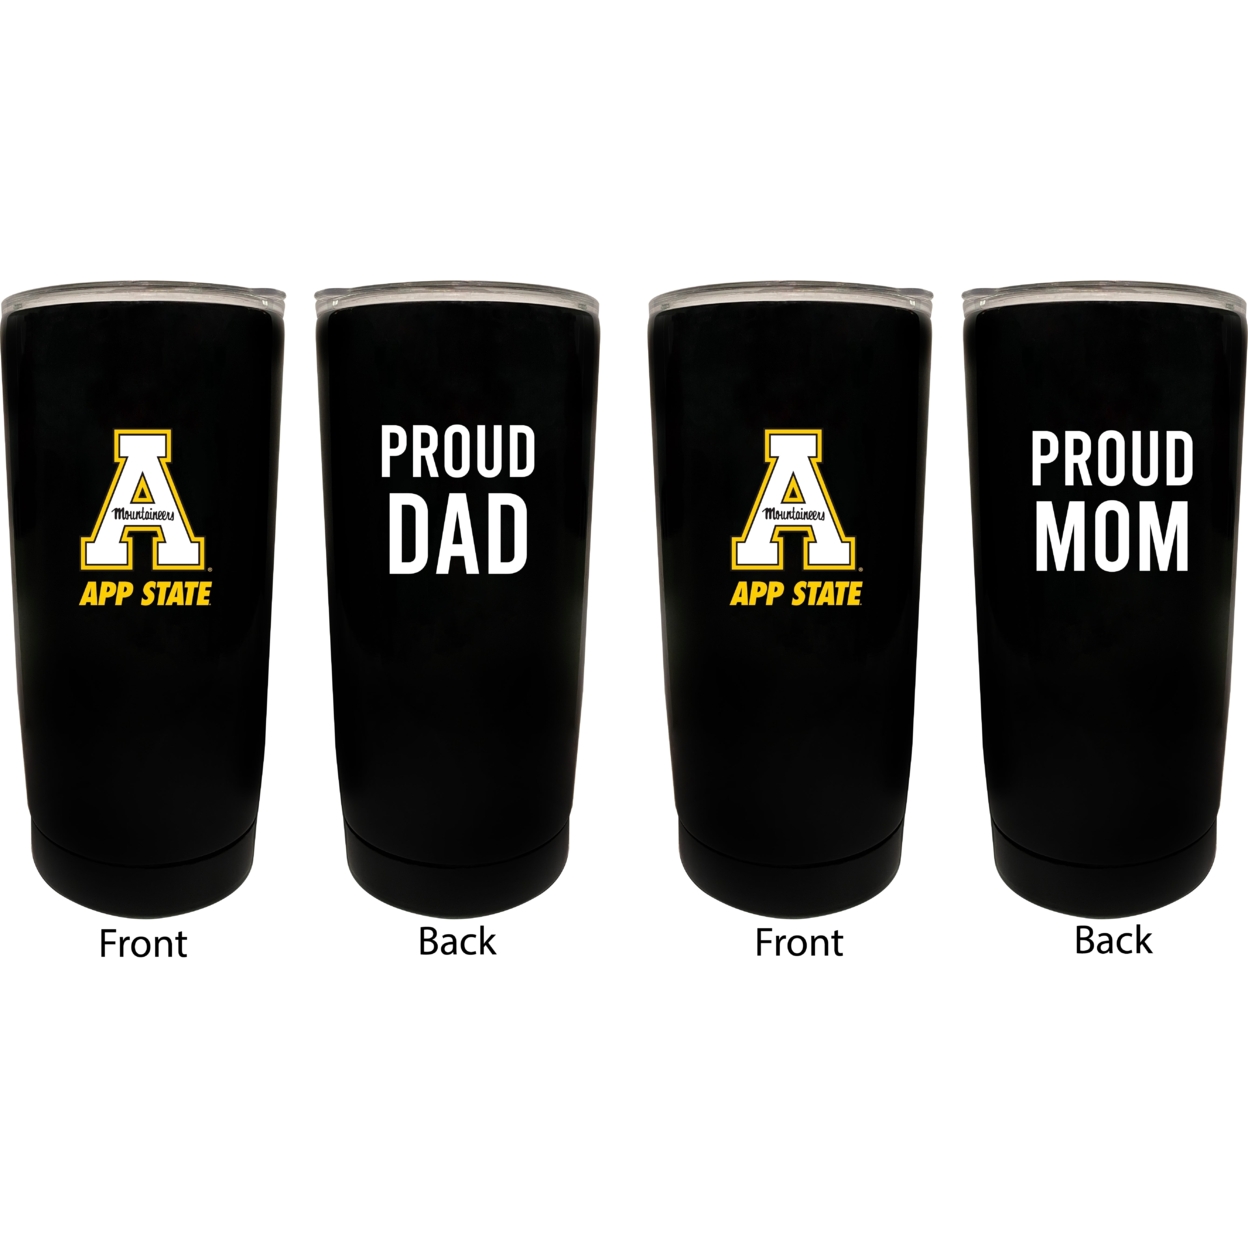 Appalachian State Proud Mom And Dad 16 Oz Insulated Stainless Steel Tumblers 2 Pack Black.